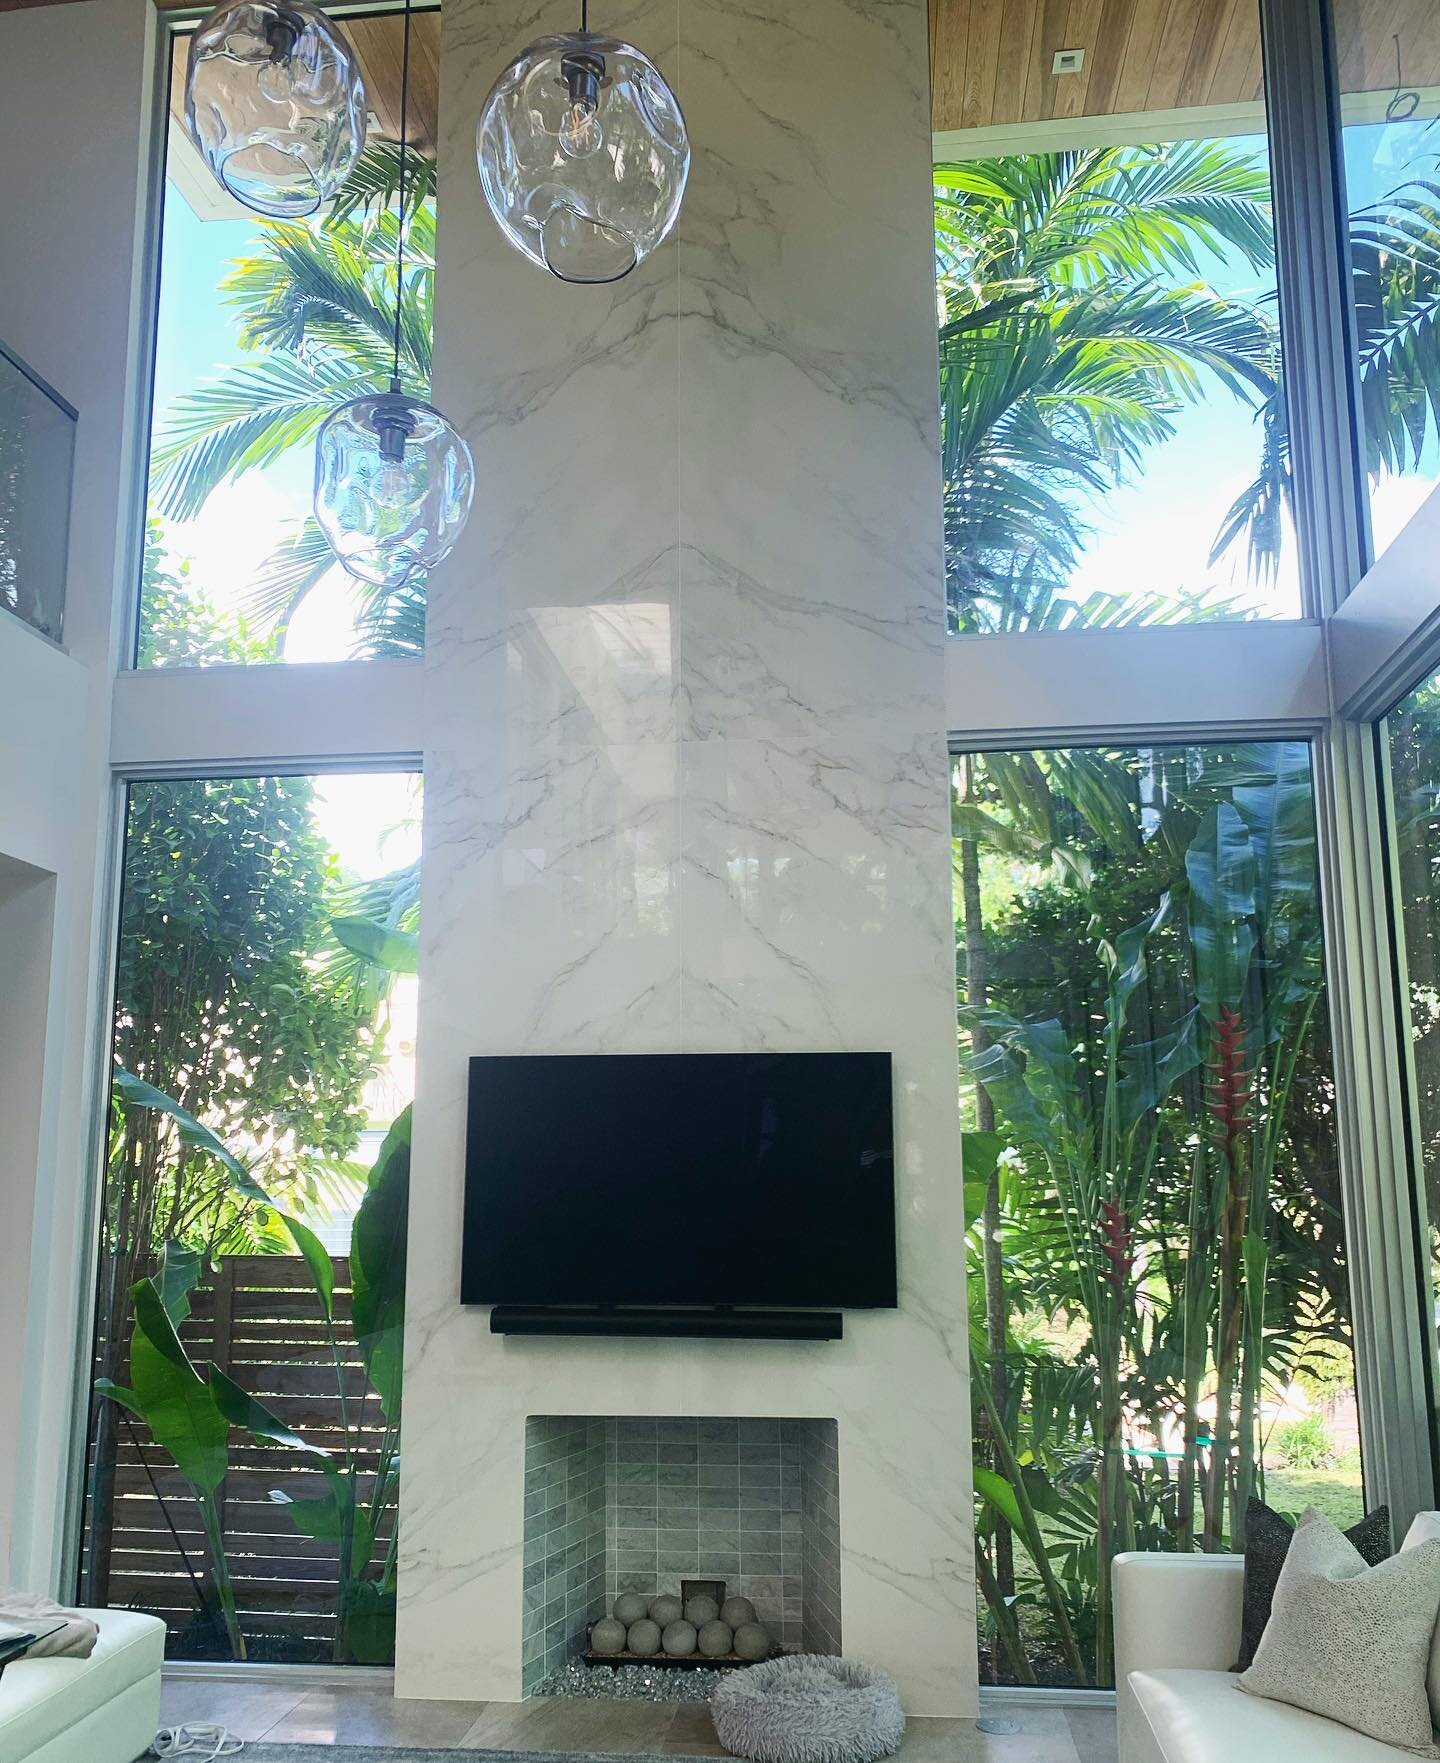 Custom made Fireplace in Italian Porcelain  #jungalowstyle #housetour #currentdesignsituation #finditstyleit #homerenovation #bathroomdesign #dreambathroom #bookmatchedslabs #bookmatch #fireplace #fireplacedecor #centerpieces #homedecor #miamivice #s